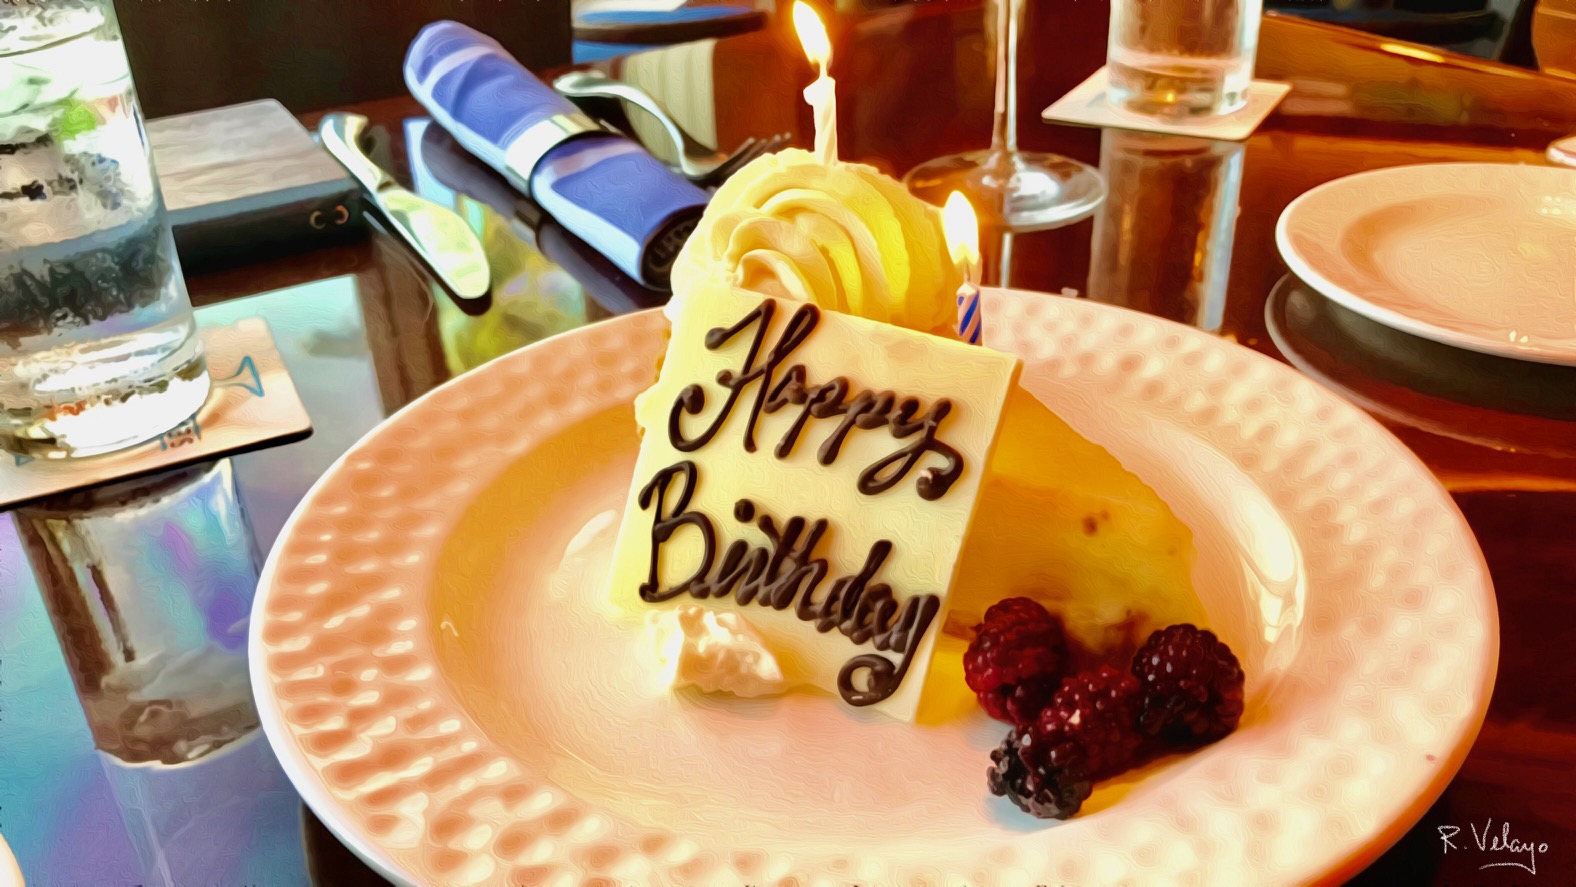 "BIRTHDAY CHEESECAKE FOR MERCEDES (8/21/18)" [Created: 10/11/2021]